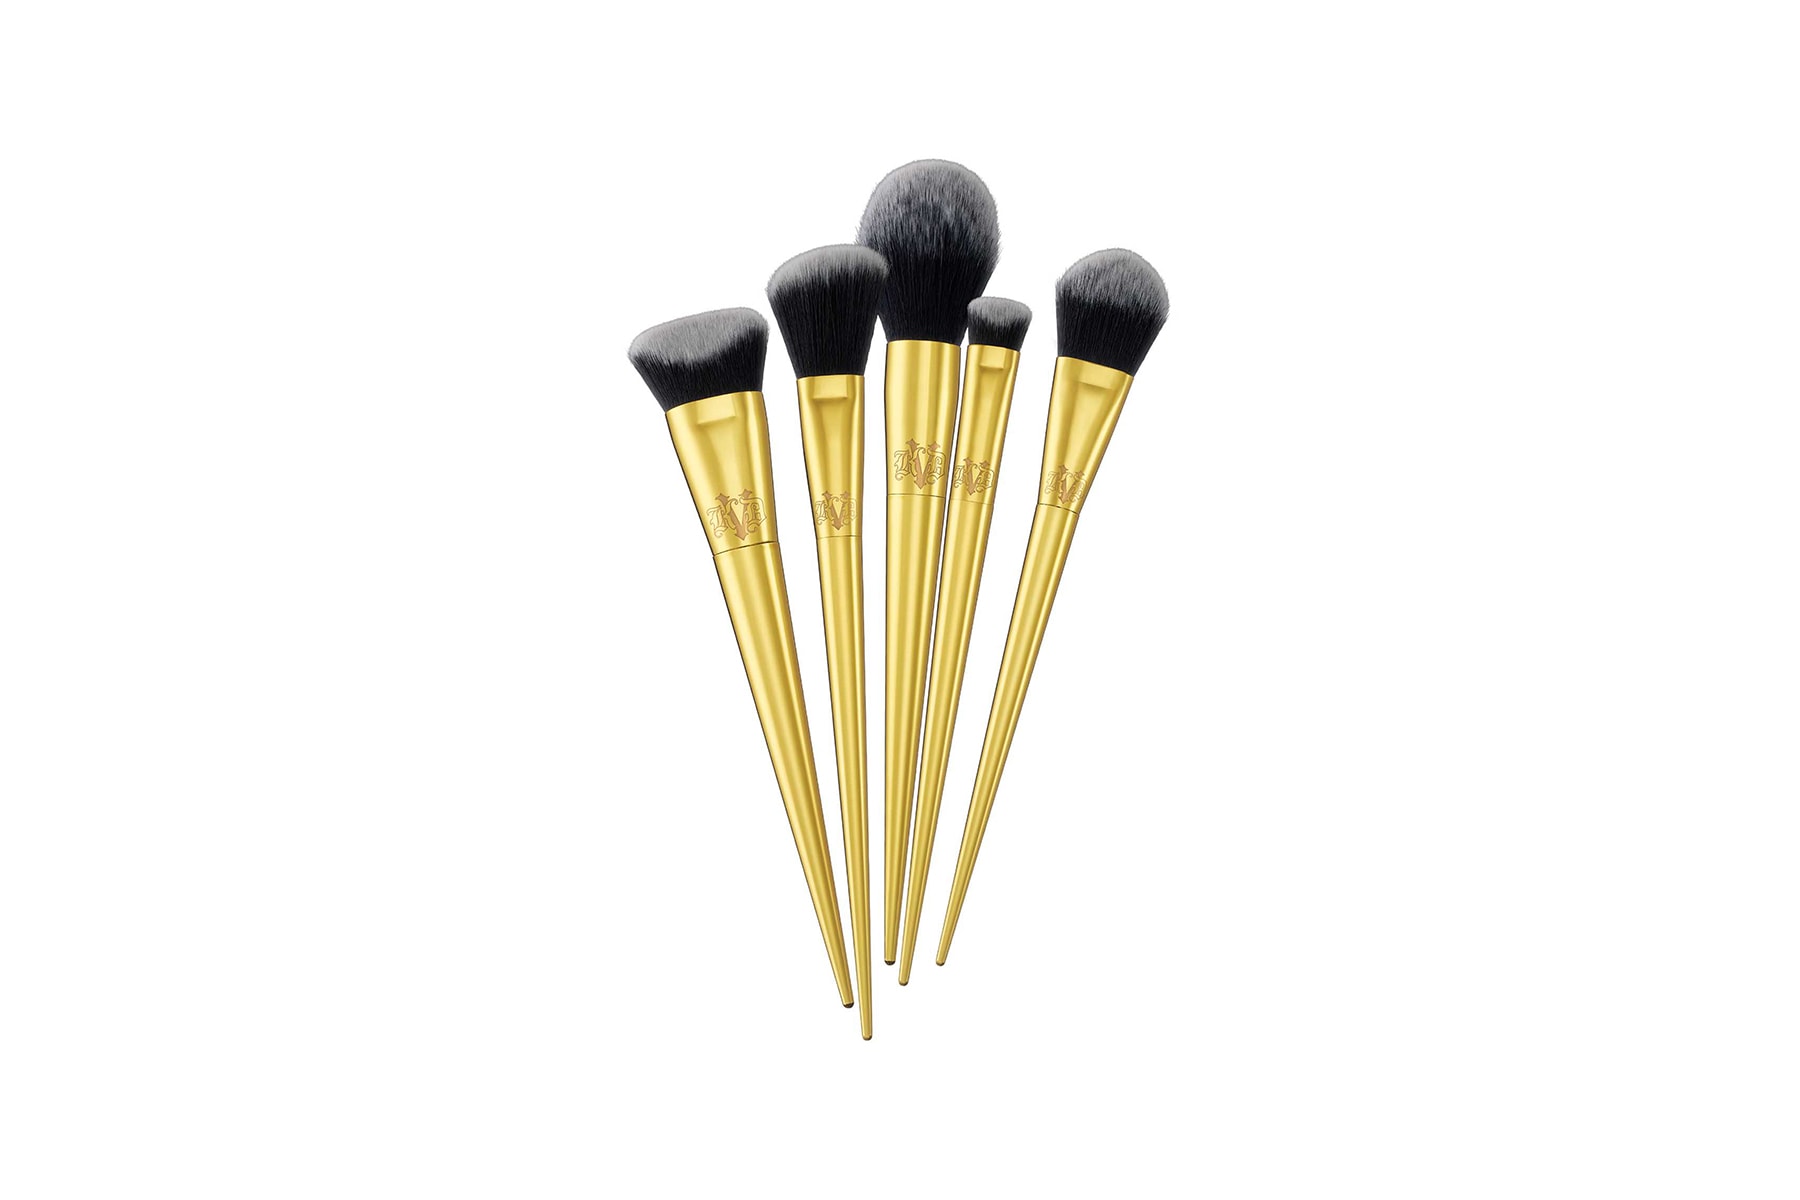 kat von d beauty 10 year anniversary makeup collection gold makeup brushes